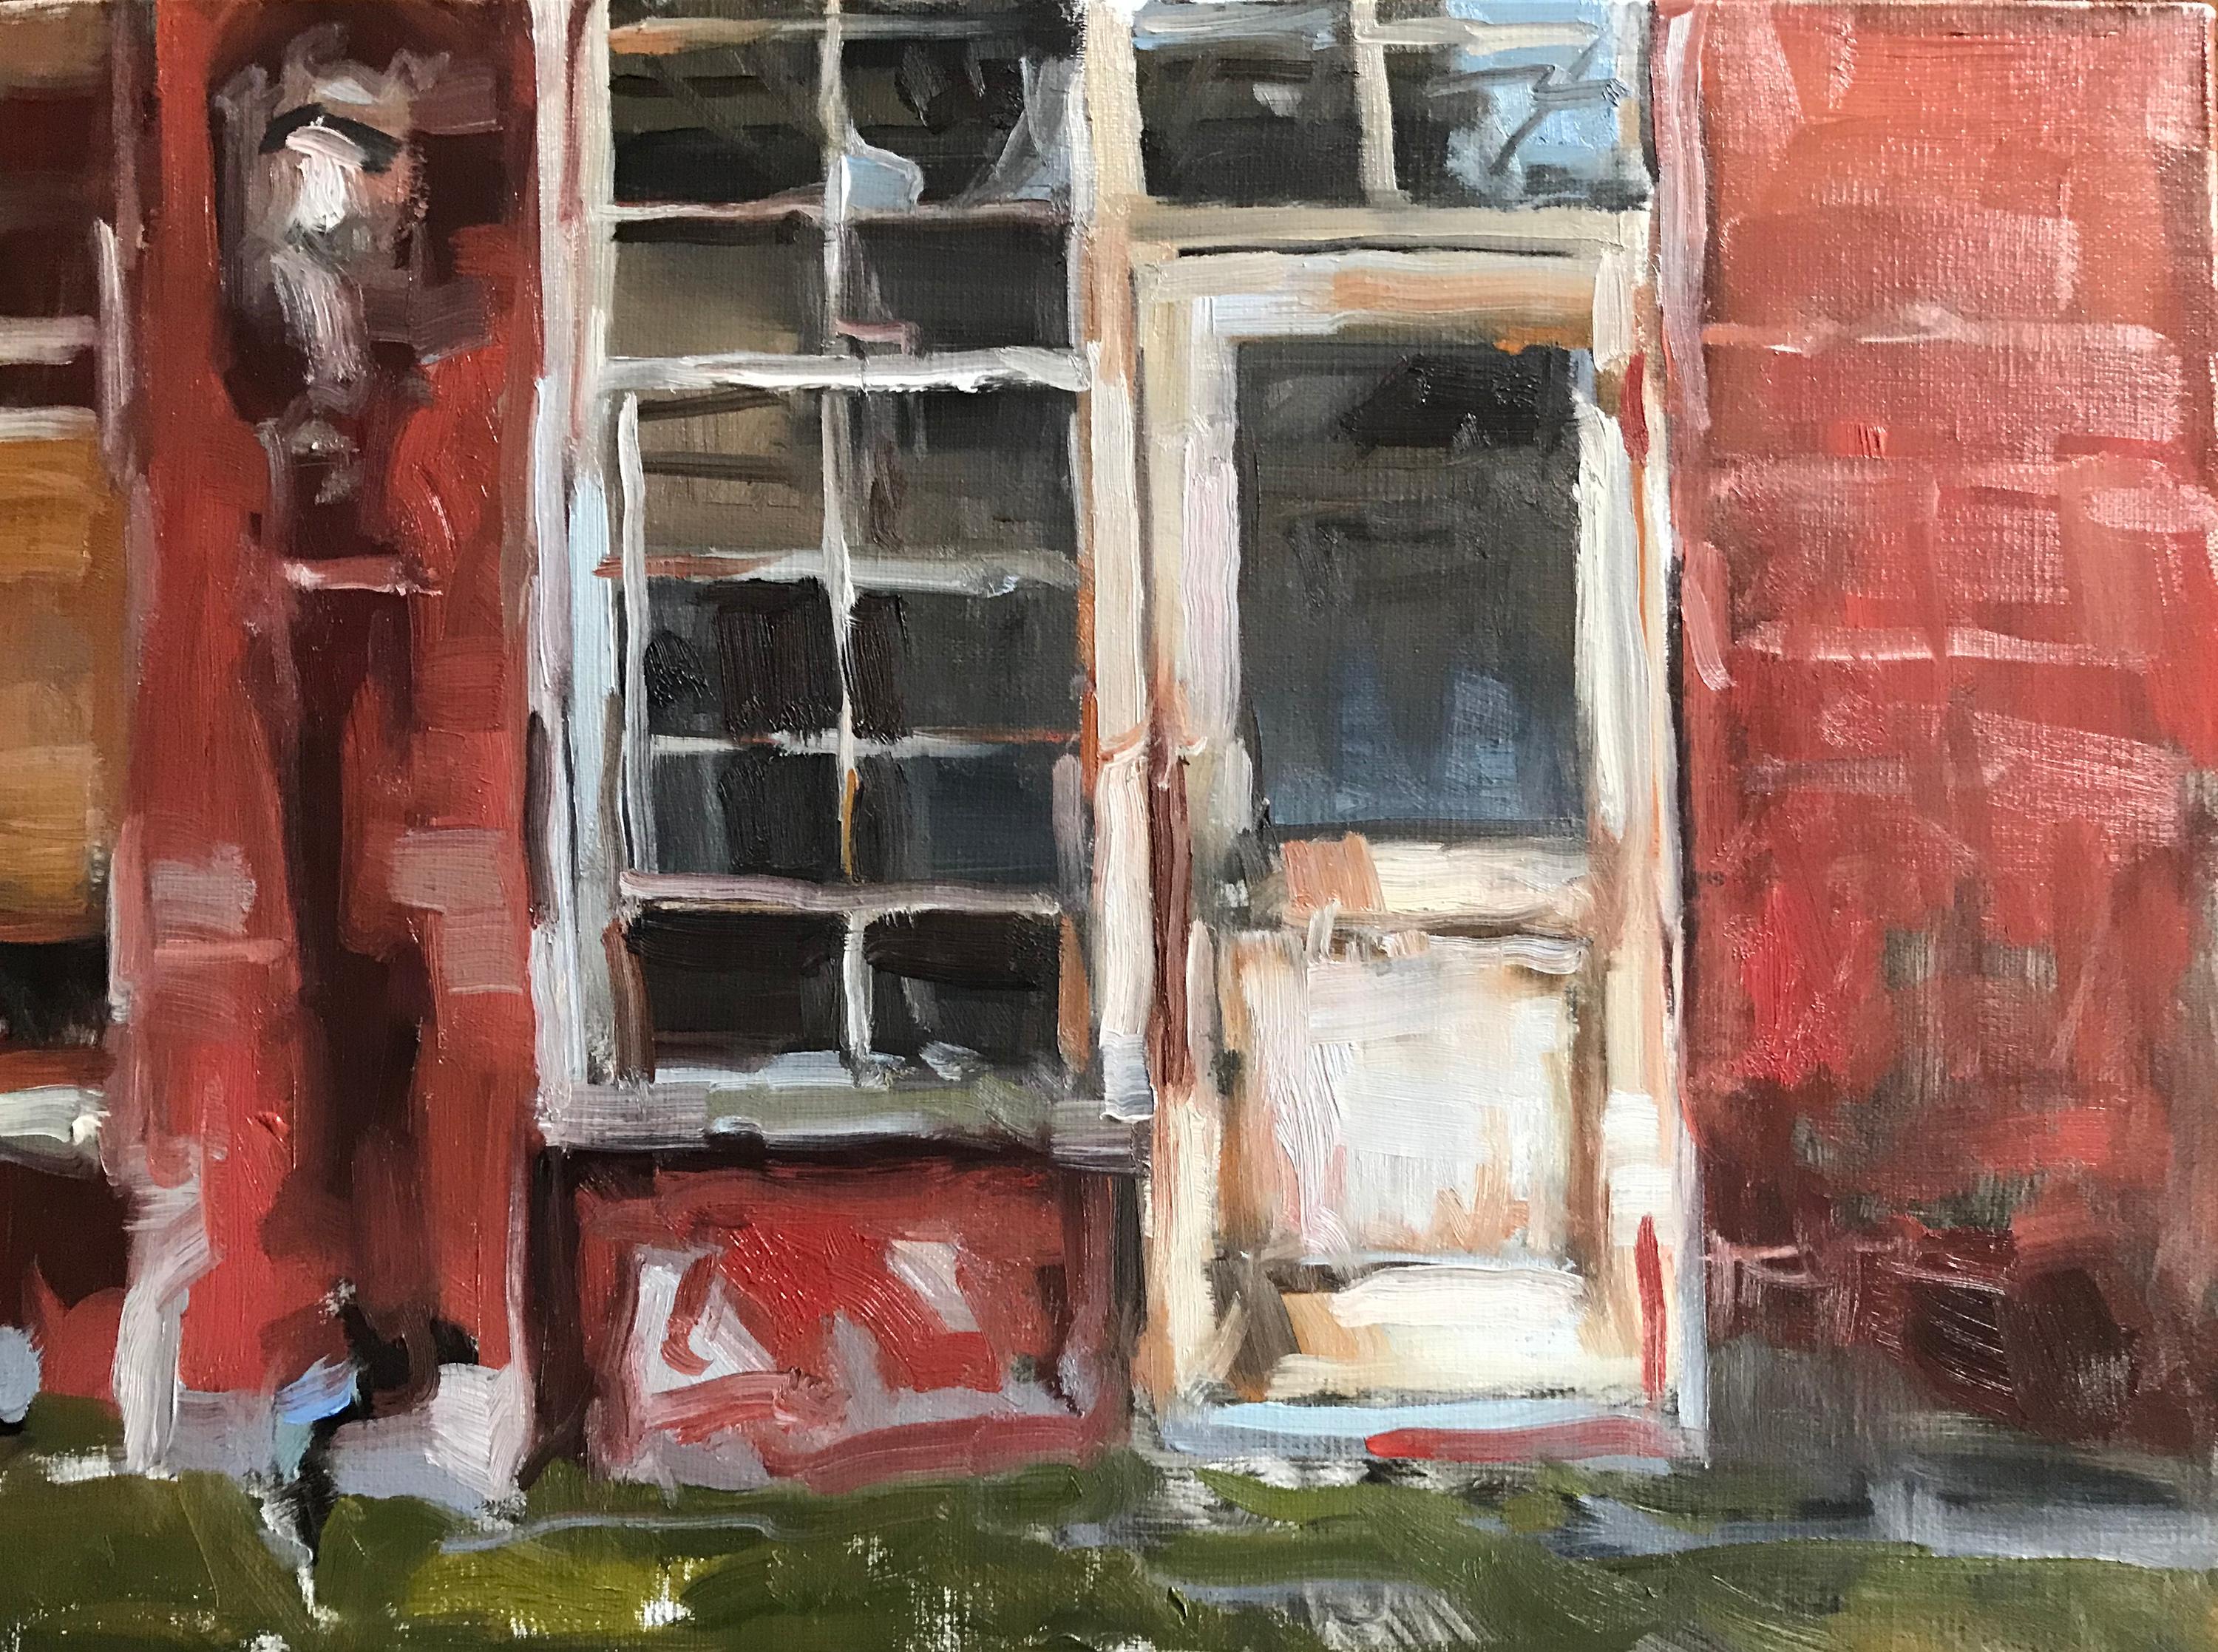 "Passage" is a small plein air landscape painting featuring red, yellow, white and green hues. 
David Boyd is inspired by the work of Edward Hopper, Andrew Wyeth and Winslow Homer.

David Boyd is a plein air artist who paints the Southeast’s urban